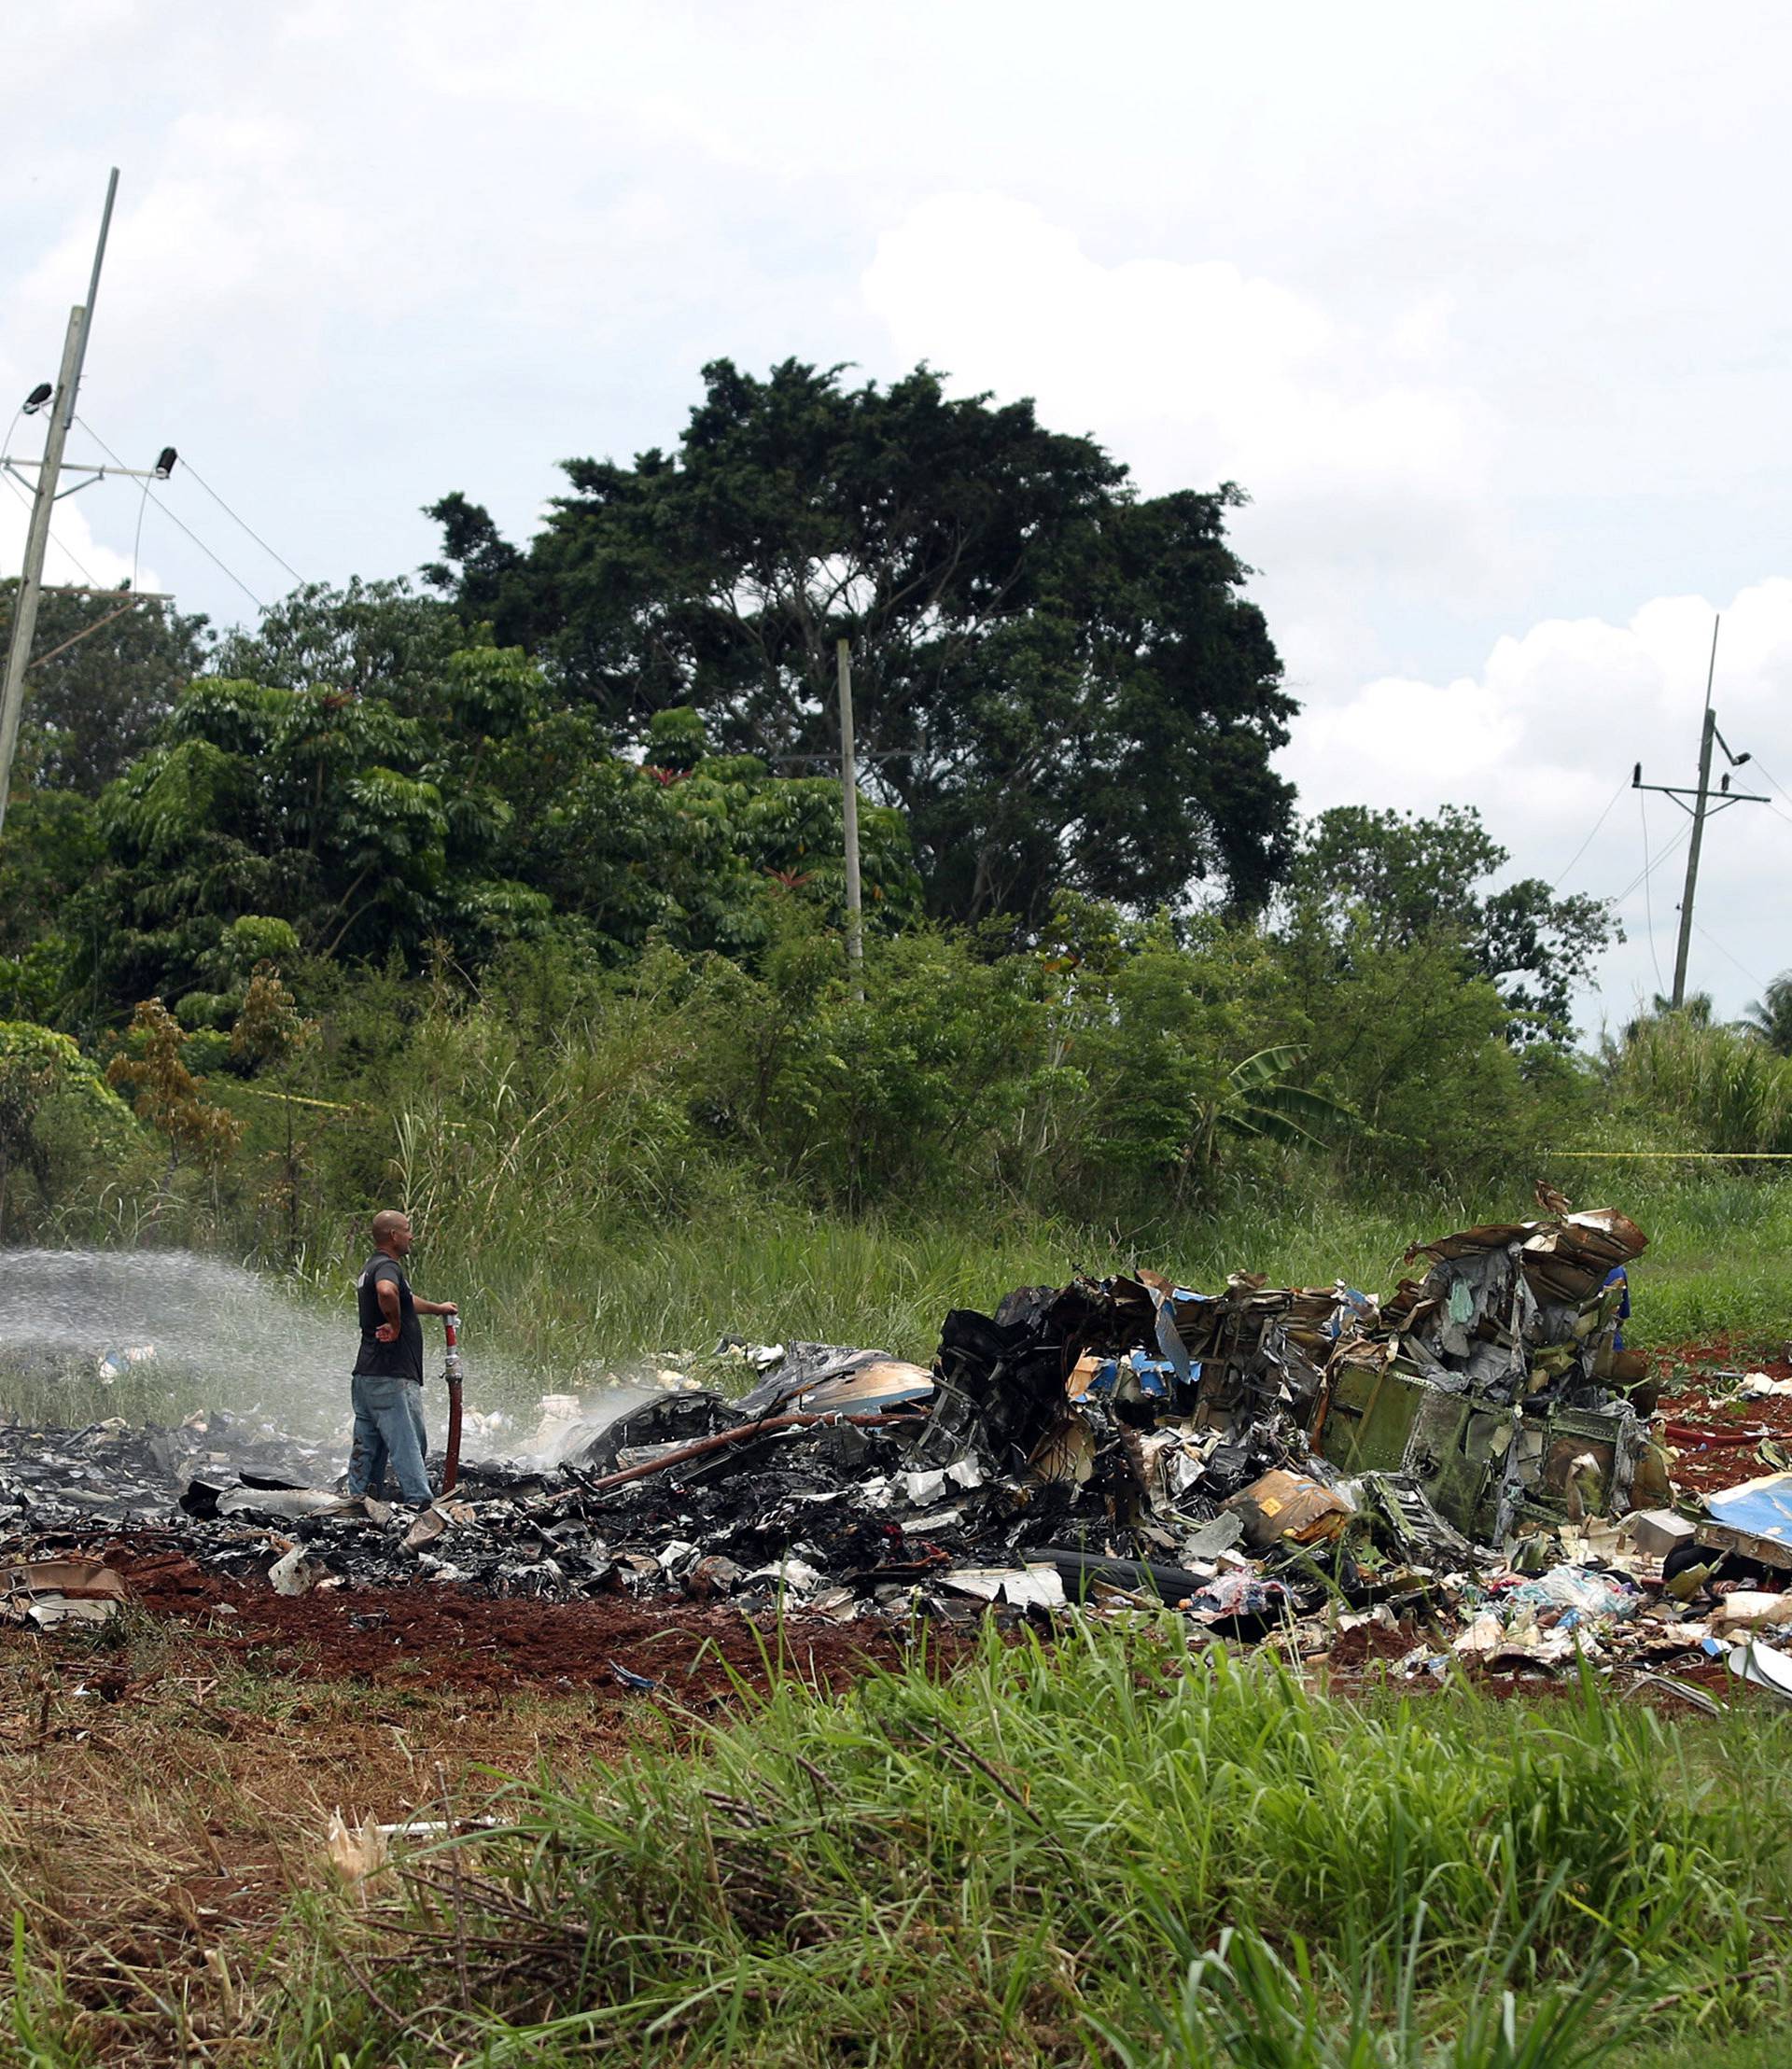 Rescue team members work in the wreckage of a Boeing 737 plane that crashed in the agricultural area of Boyeros